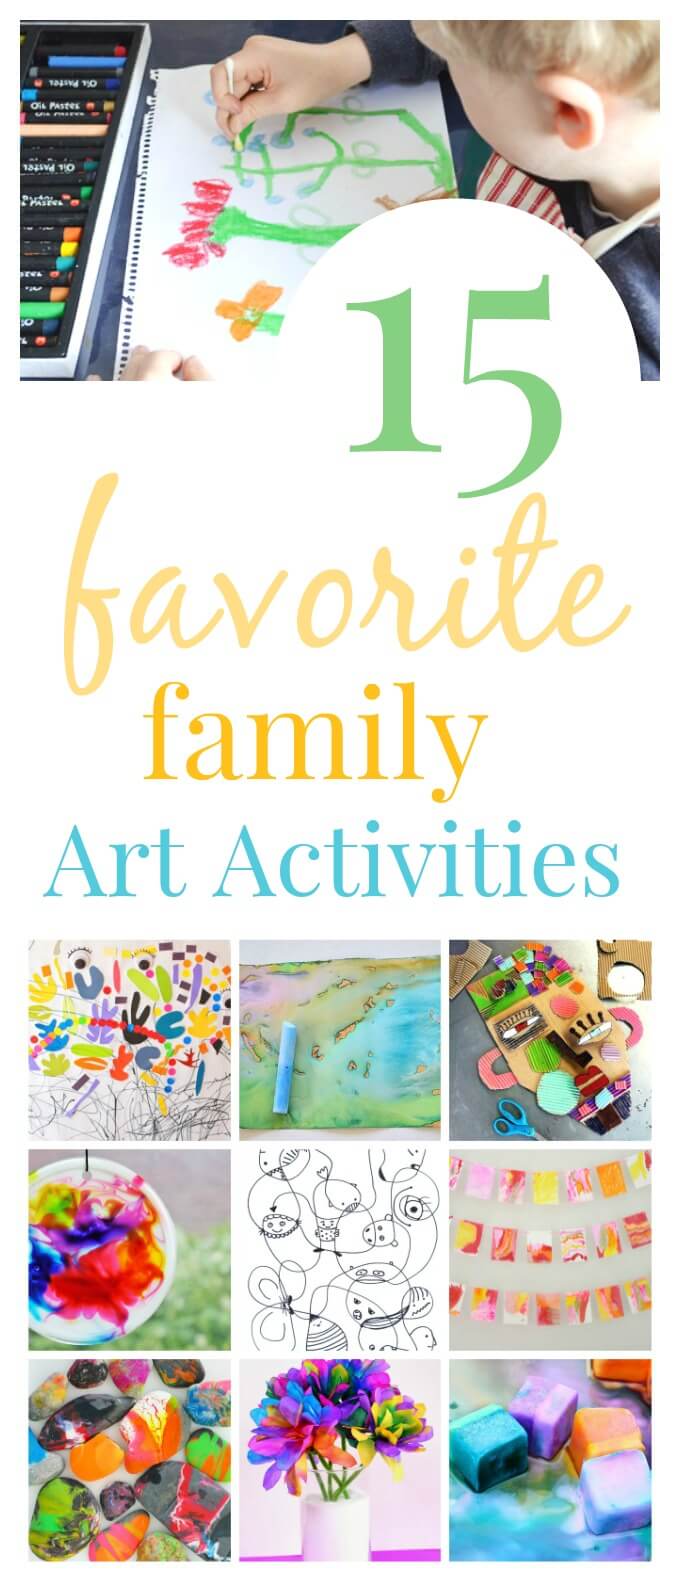 18 Art Activities For Kids: Age-By-Age Art Activities Guide